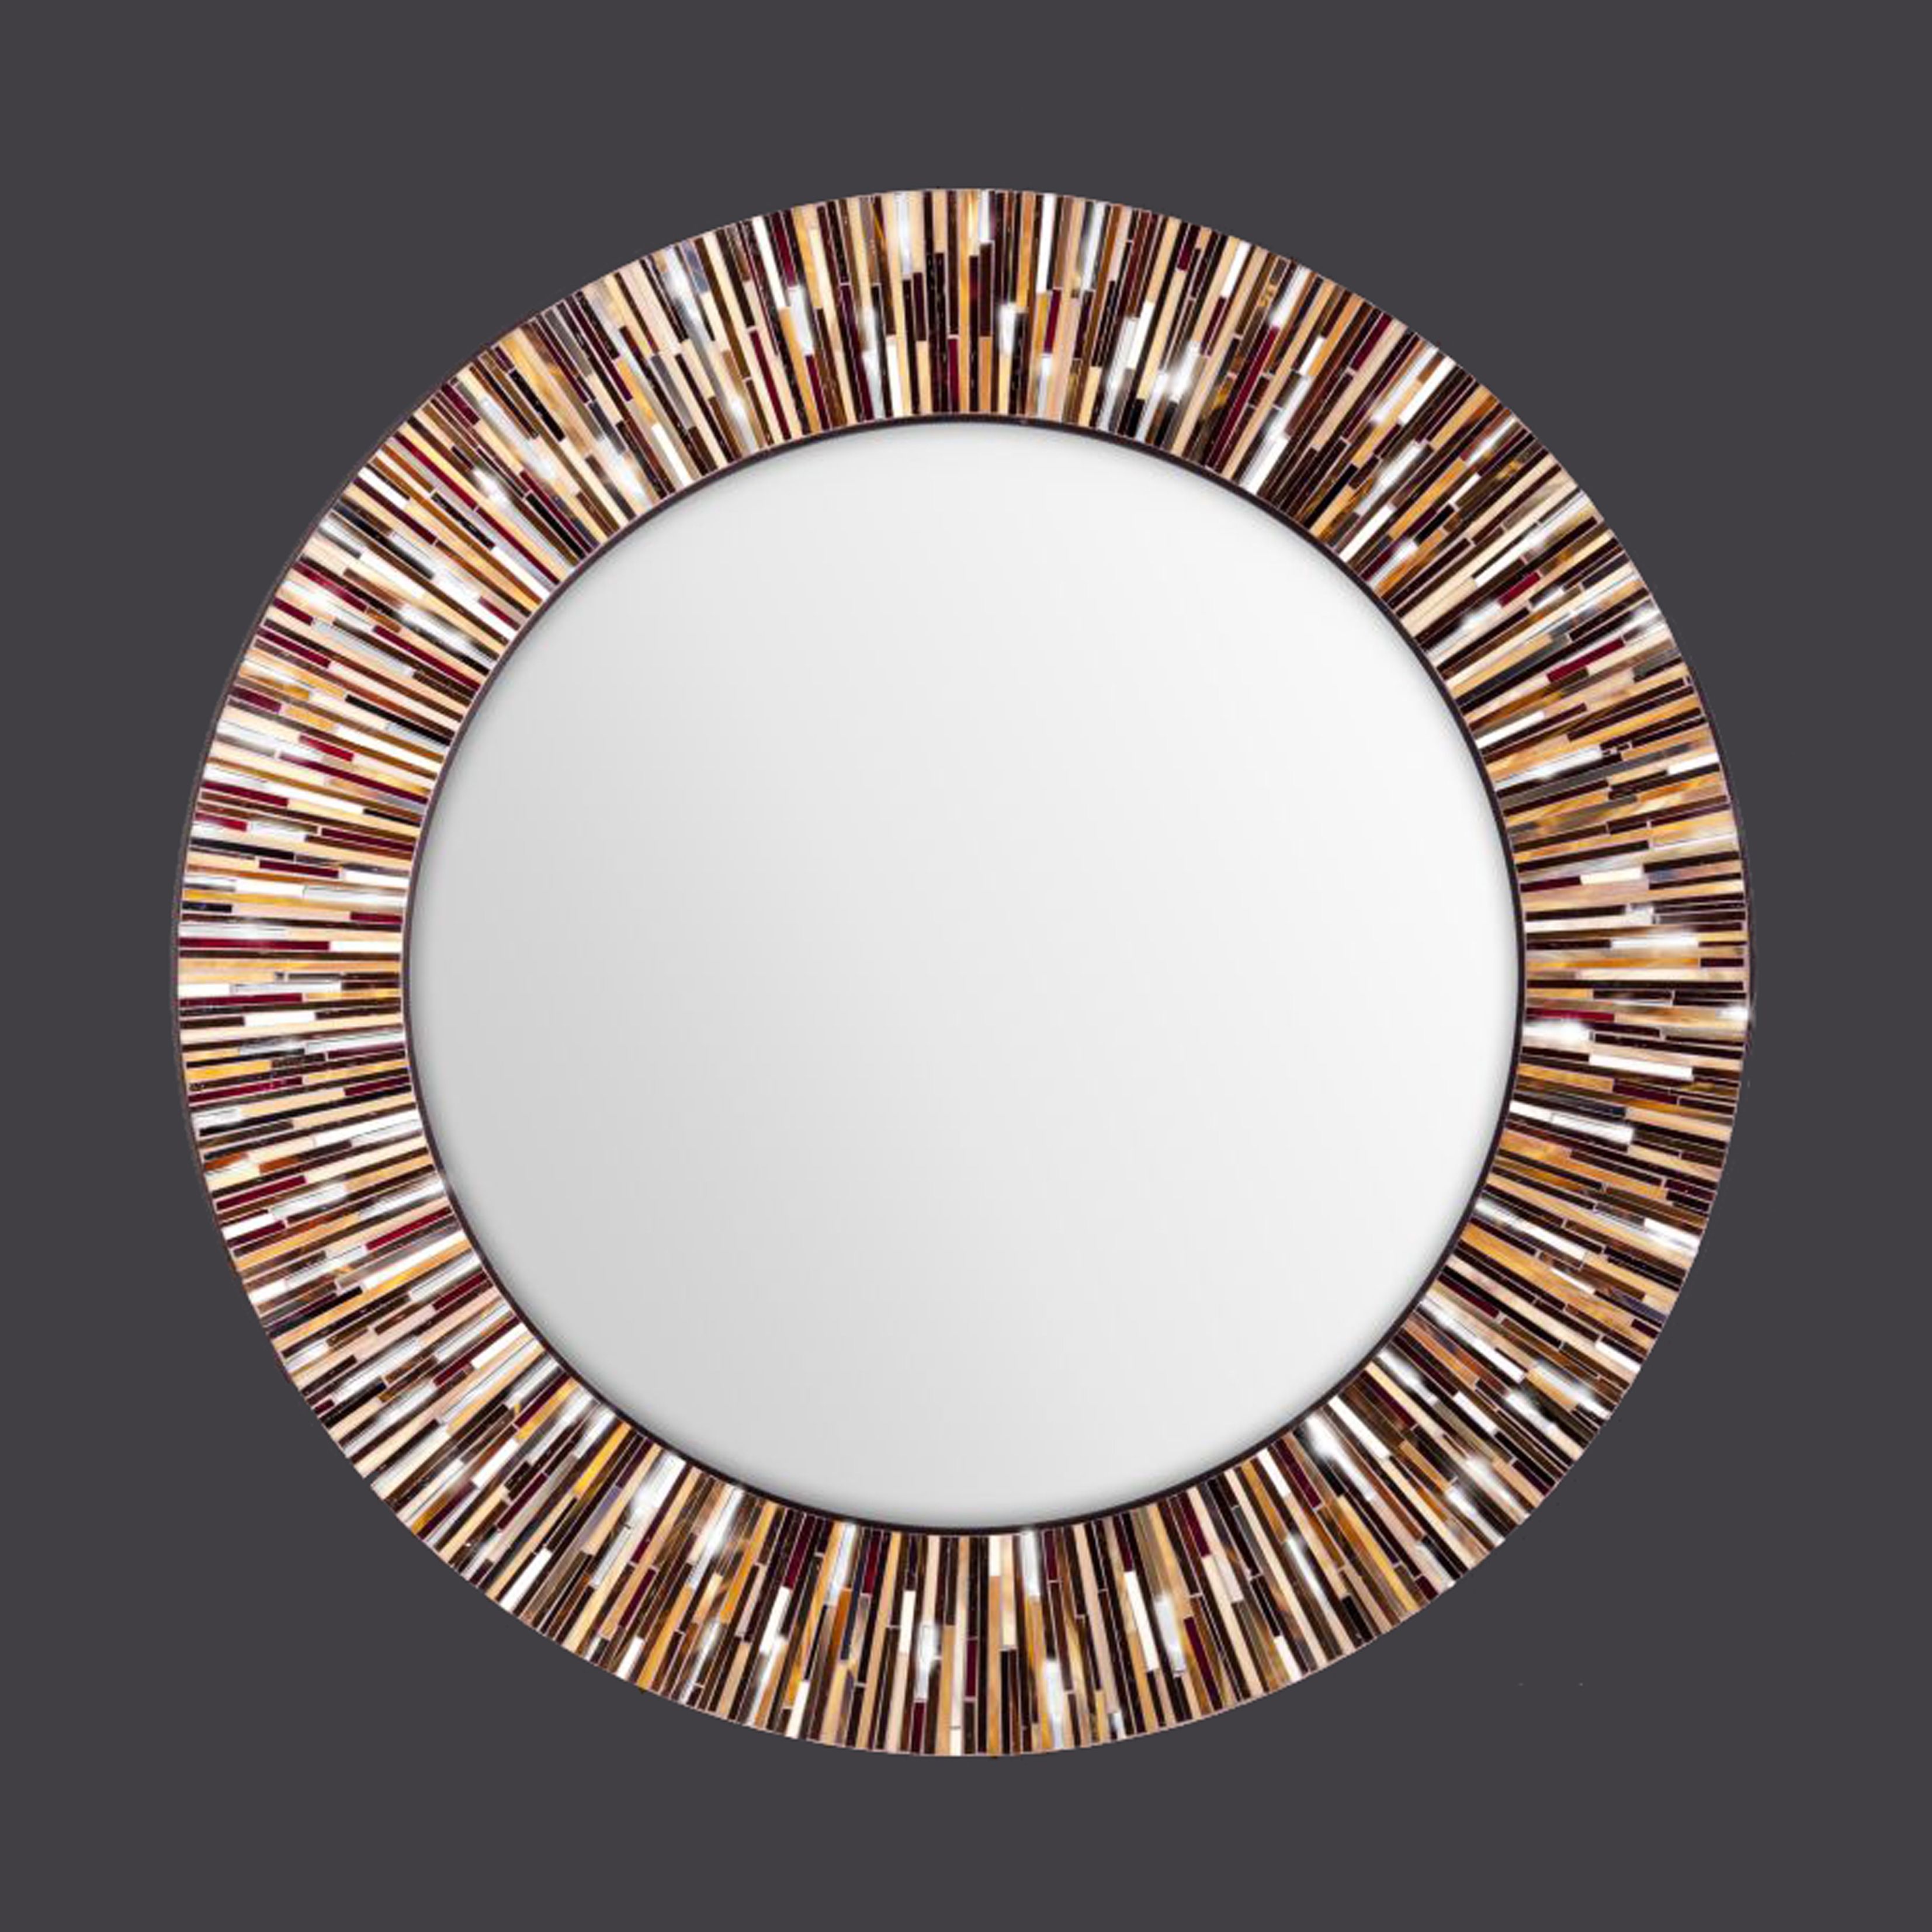 Mosaic Wall Mirrors Piaggi For Funky Mirrors (View 10 of 15)